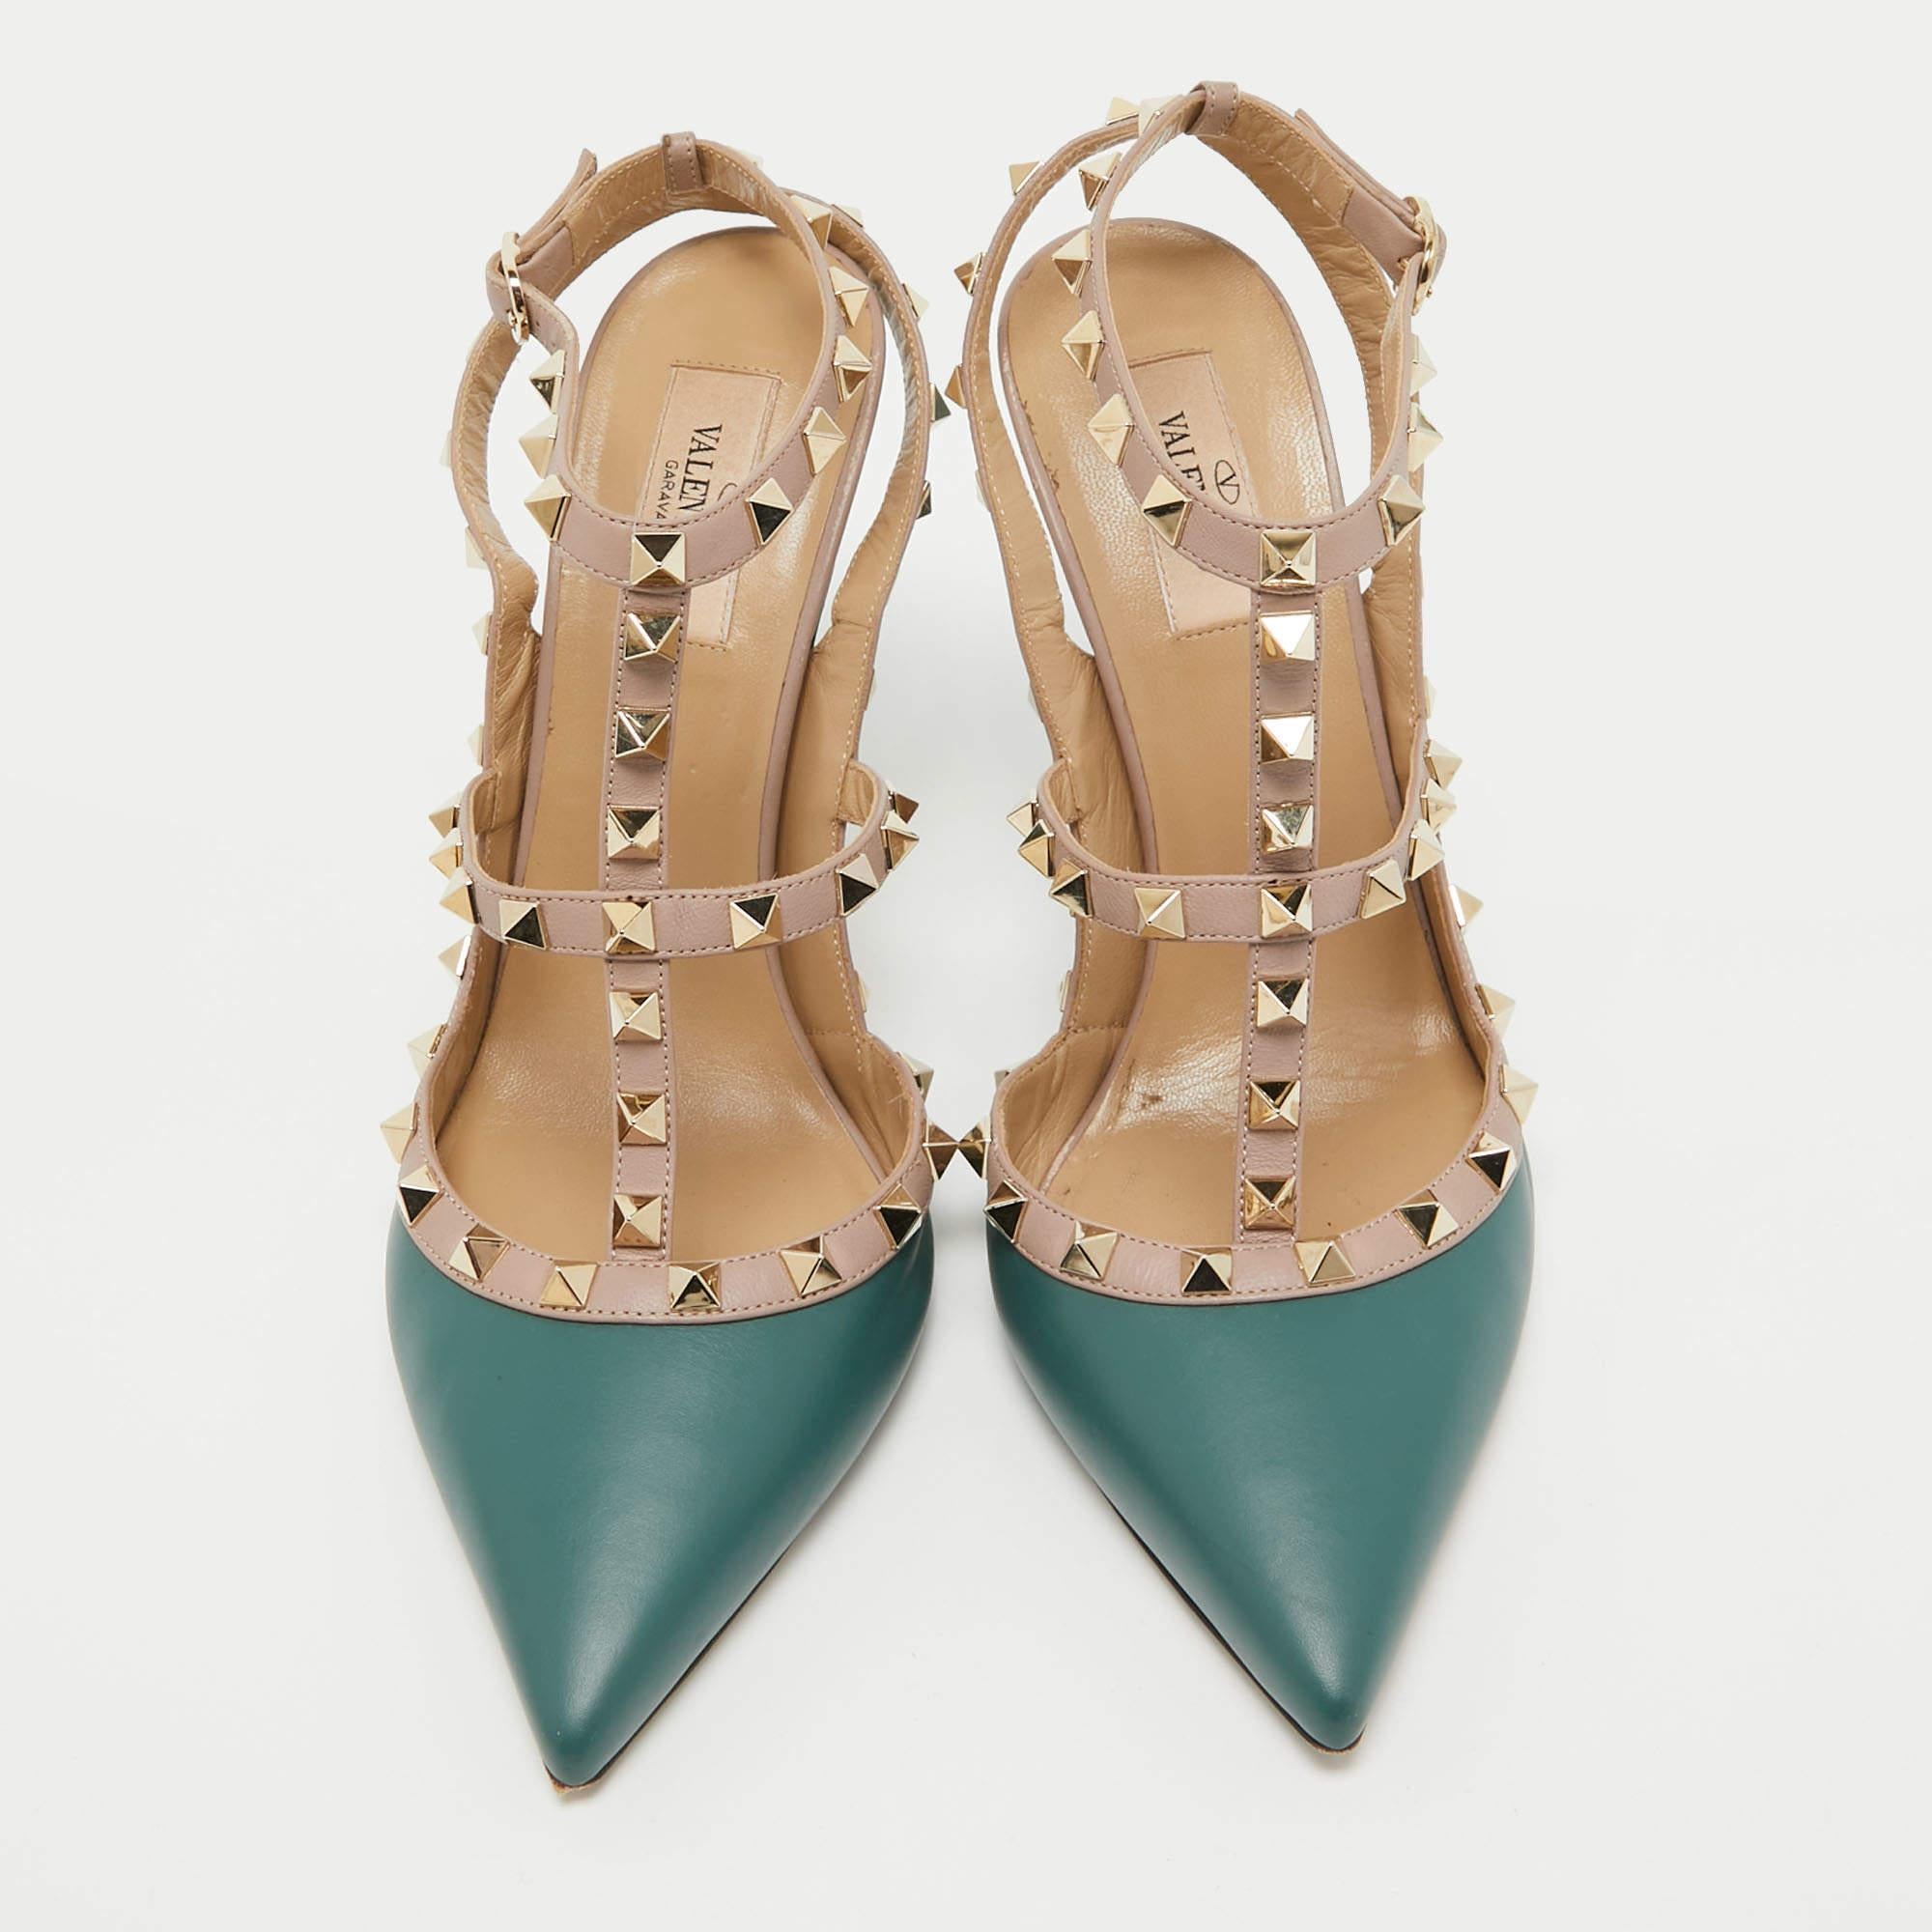 Crafted in a classy hue, we love these Valentino pumps. Designed to make a statement, they have a sleek silhouette and a nice fit. Wear yours under maxi skirts for a peek of glamour, or let them shine with cropped hemlines.

Includes: Original